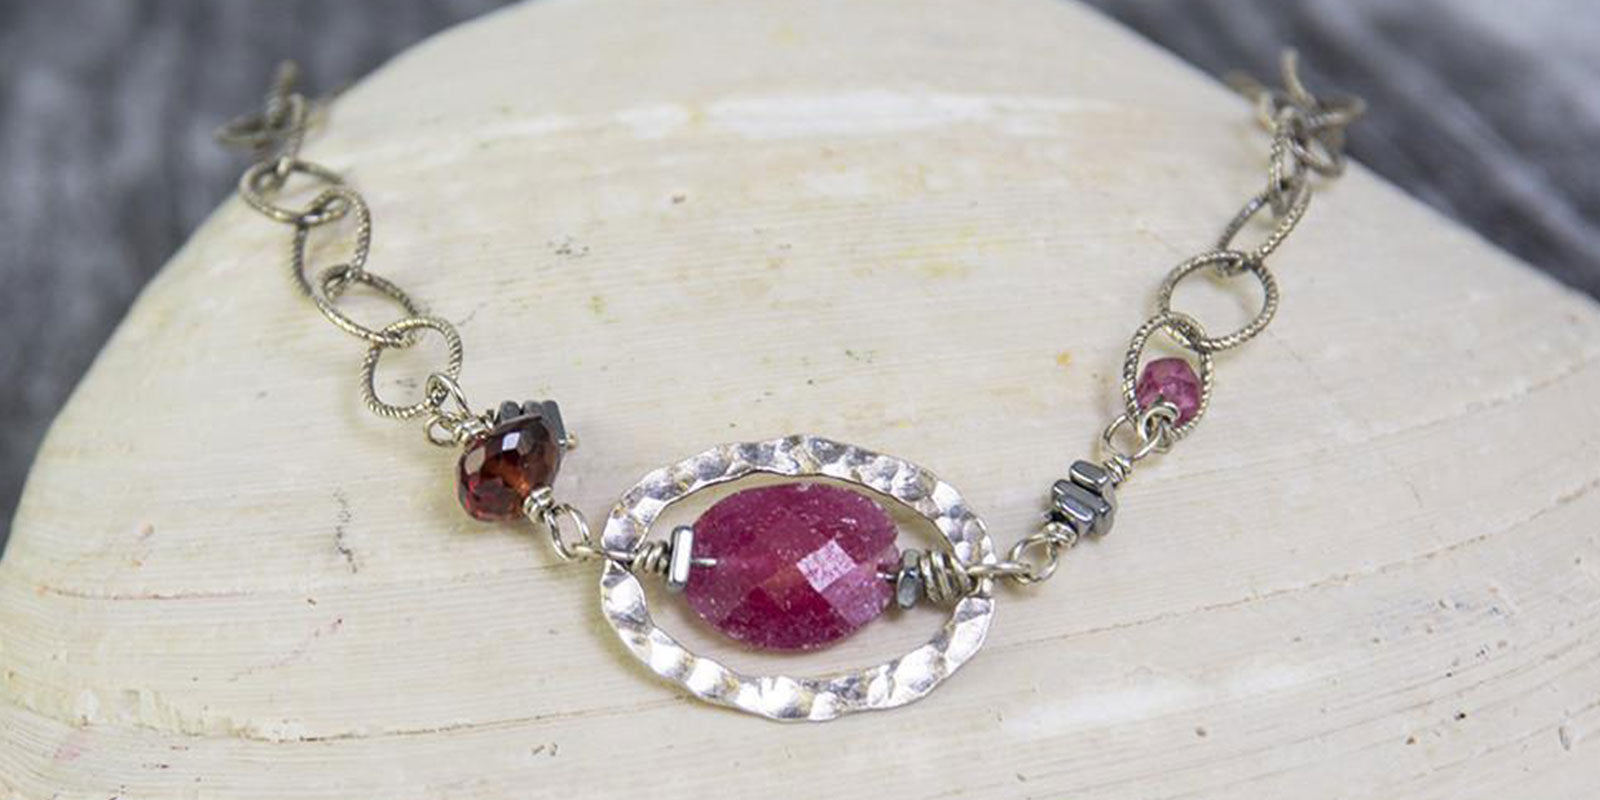 Why Handmade Jewelry Makes a Great Gift